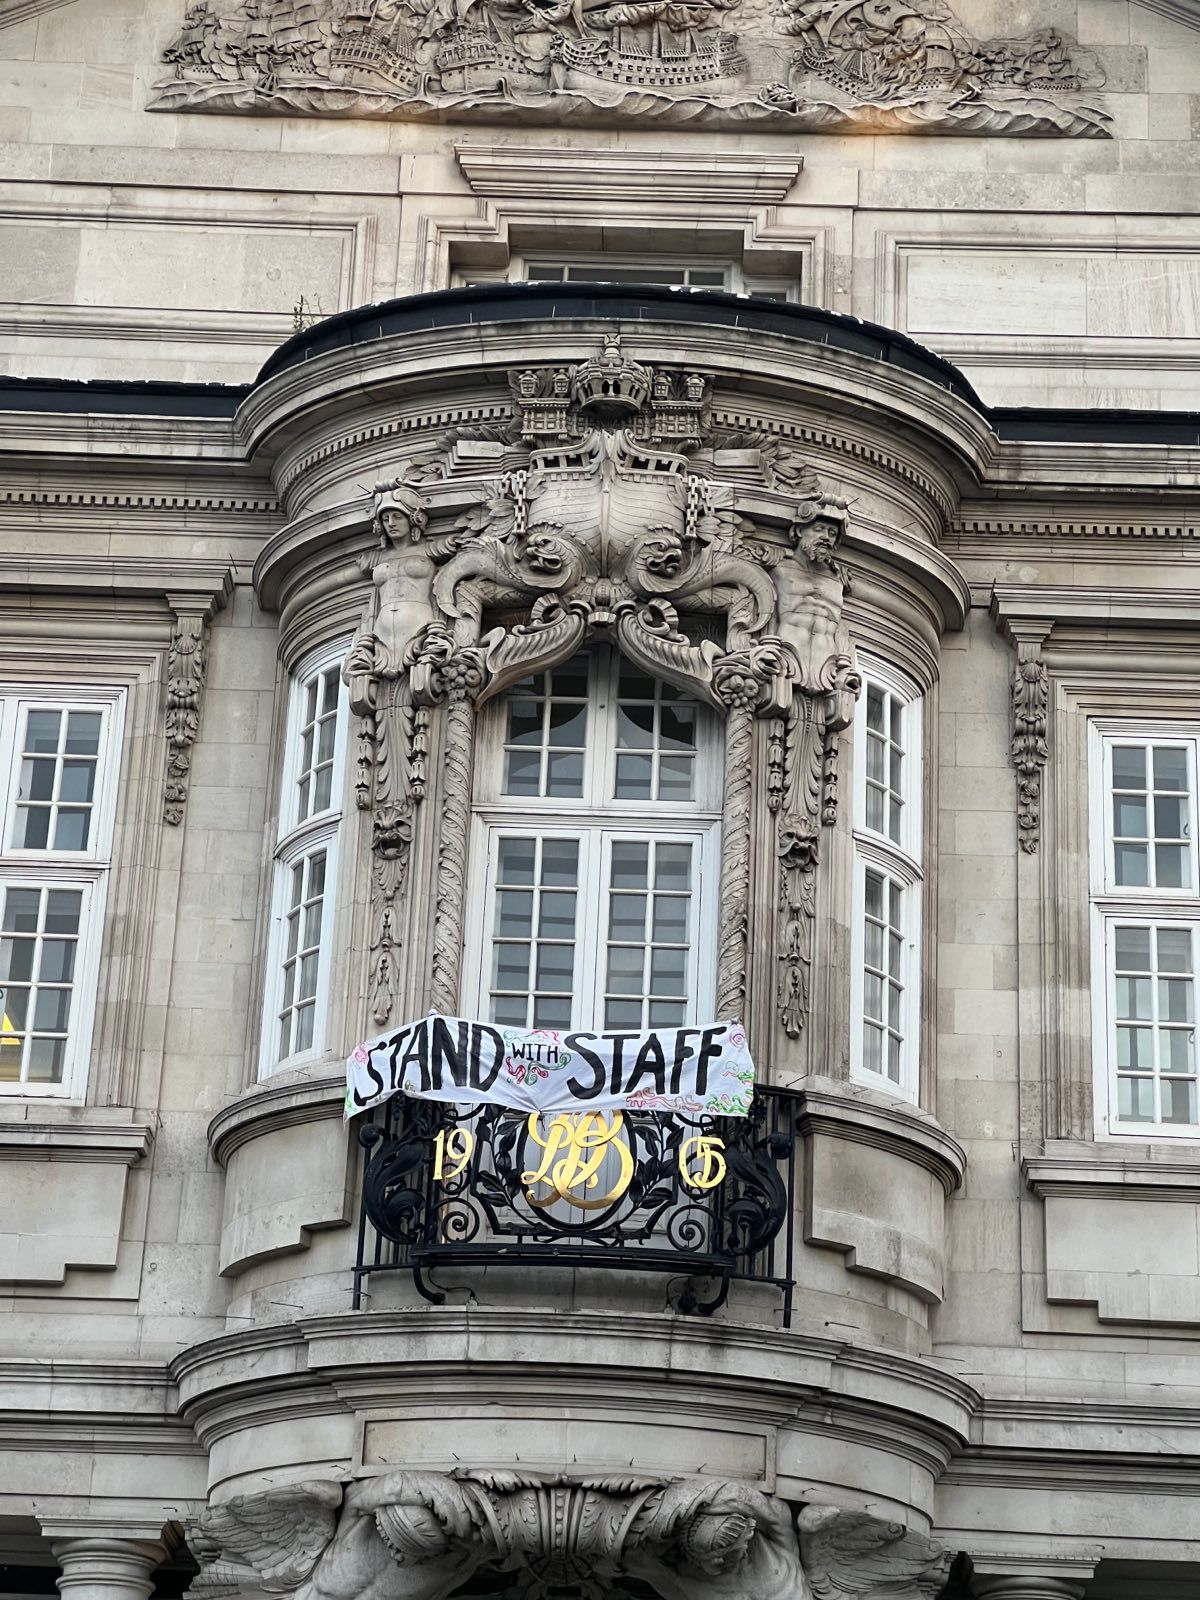 Protestors unfurled a banner at Deptford town hall reading “stand with staff” 

Courtesy Goldsmiths Stories, via X, formerly known as Twitter